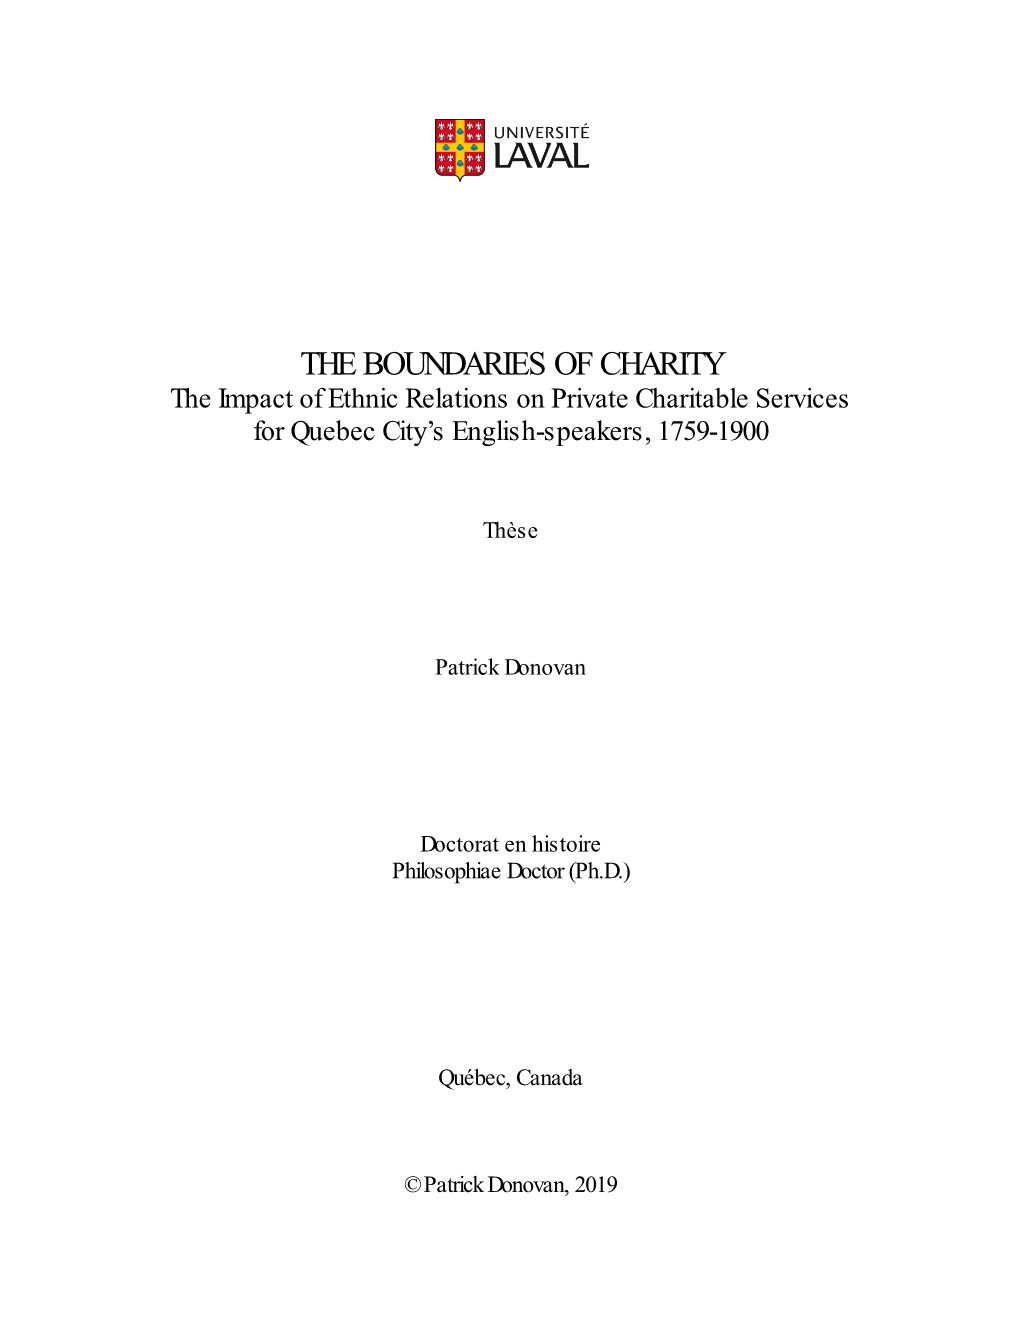 THE BOUNDARIES of CHARITY the Impact of Ethnic Relations on Private Charitable Services for Quebec City’S English-Speakers, 1759-1900